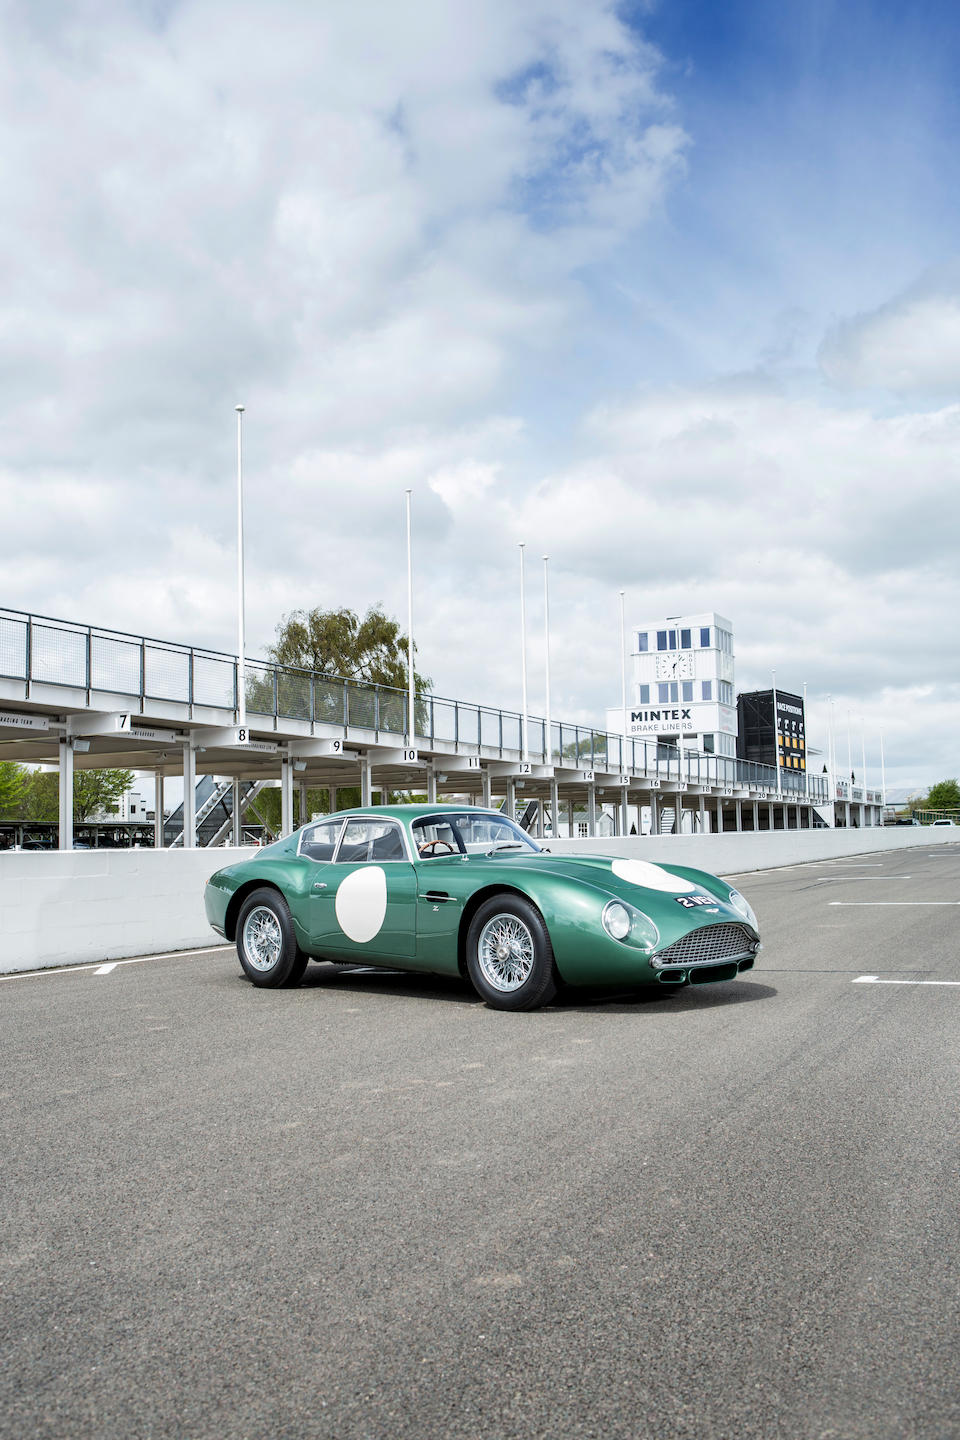 '2 VEV' - The ex-Essex Racing Stable,1961 Aston Martin 'MP209' DB4GT ZAGATO  GRAND TOURING TWO-SEAT COUPE  Chassis no. DB4GT/0183/R